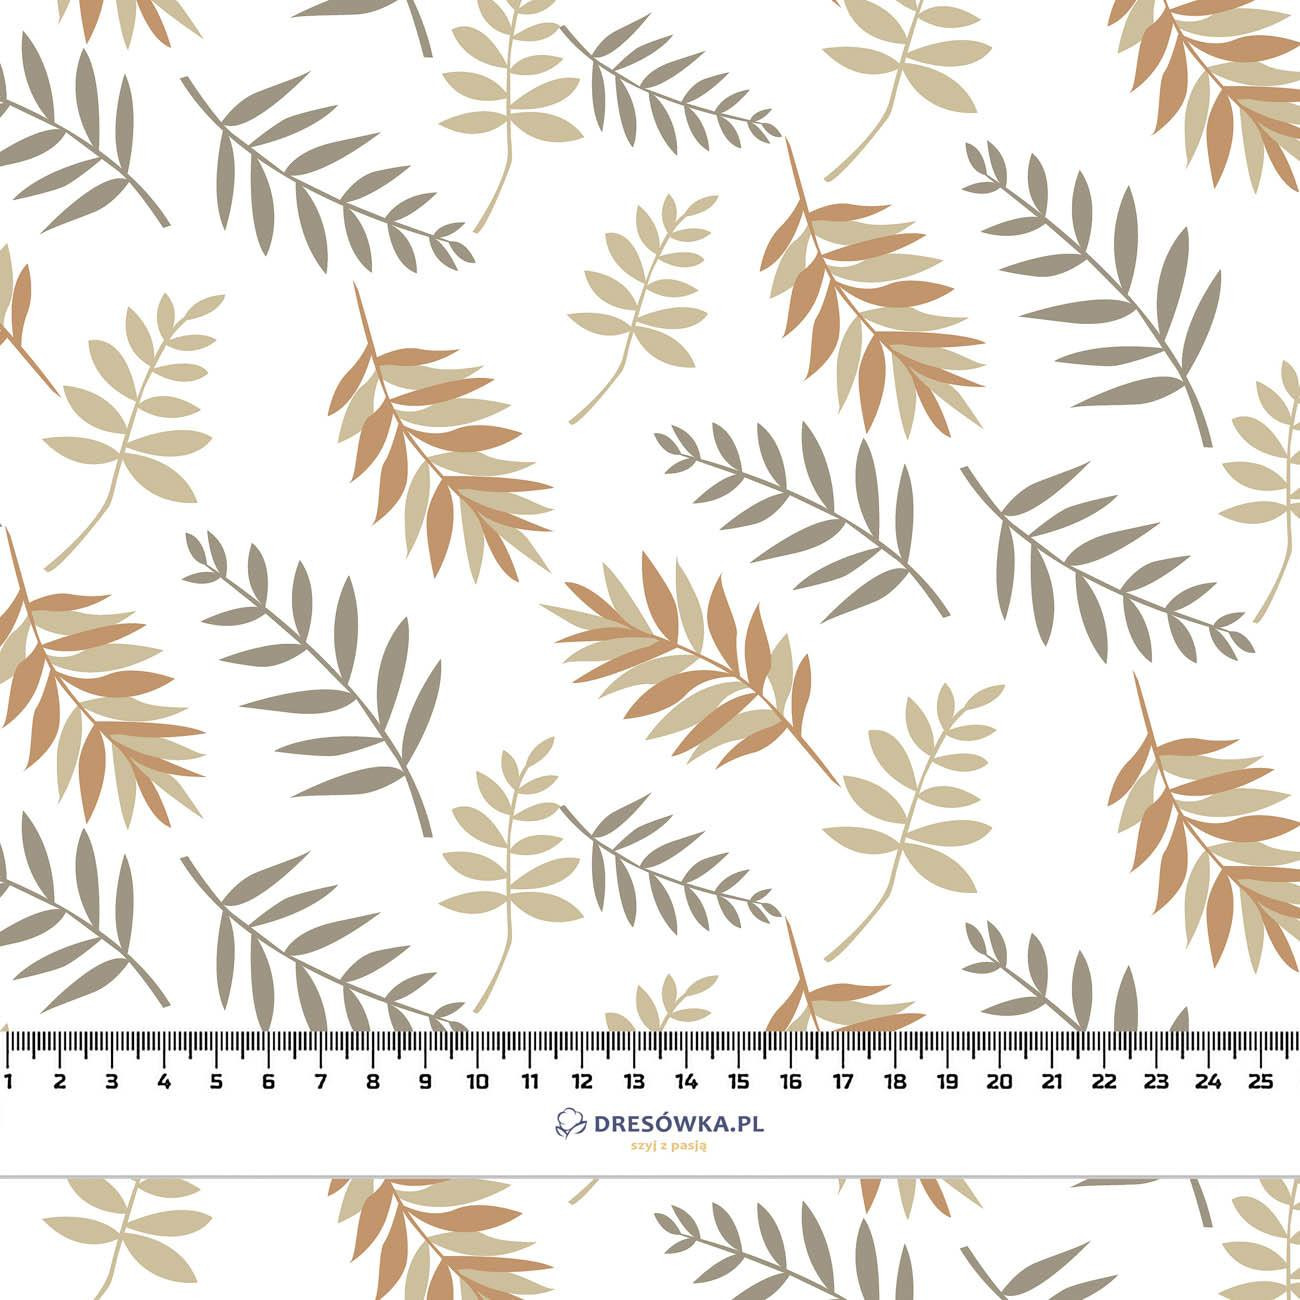 BROWN LEAVES - Cotton woven fabric